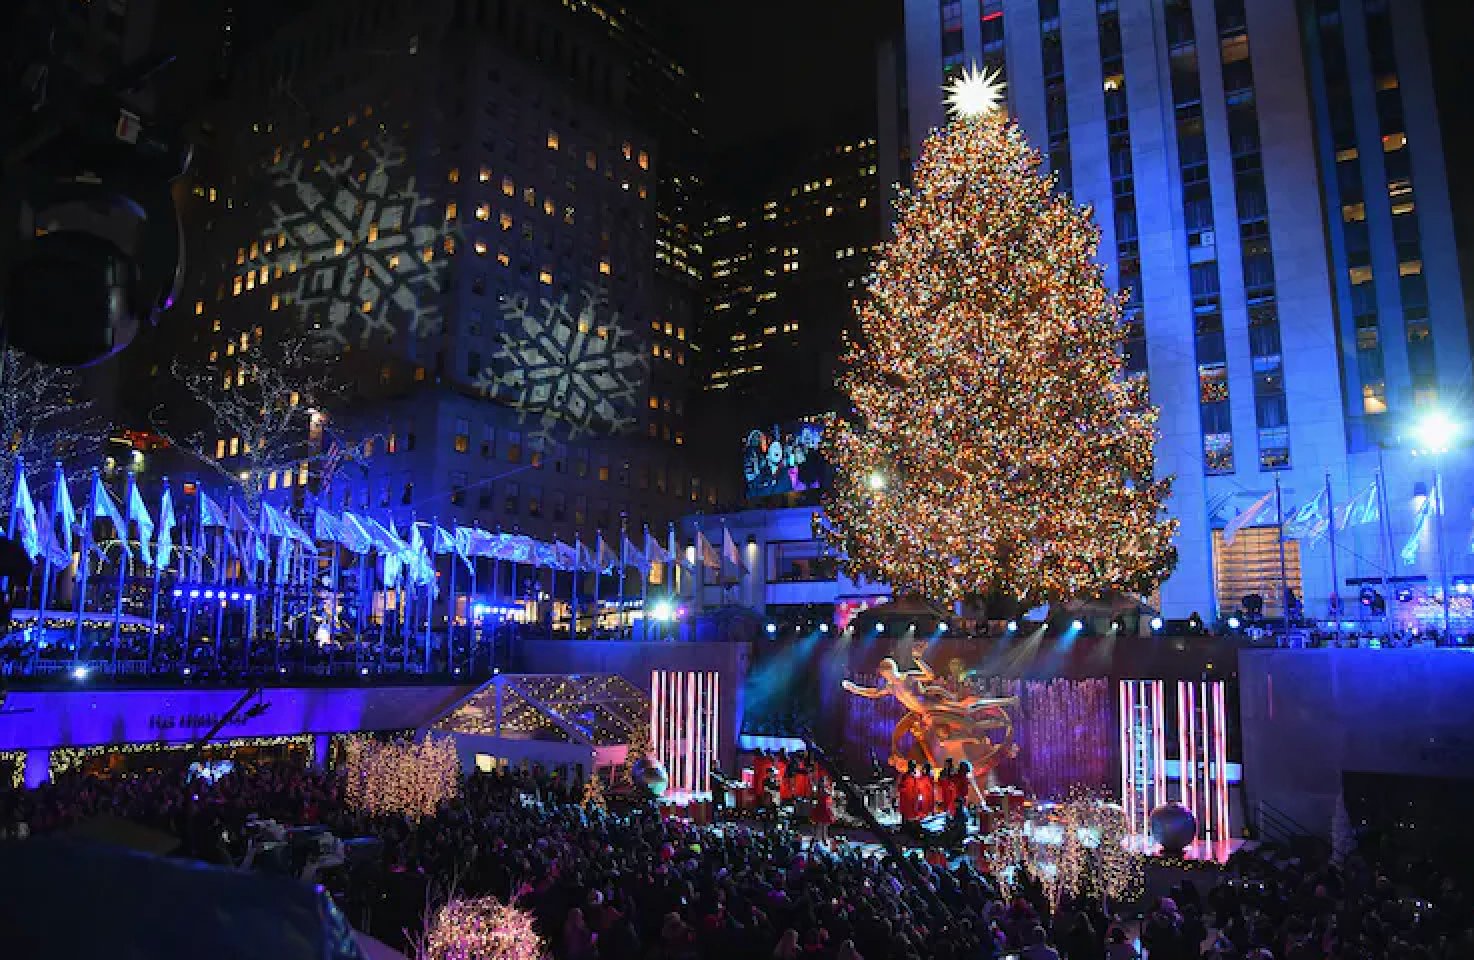 Like Rockefeller Center’s famous tree, public Christmas trees didn’t start appearing in the U.S. until the 20th century.